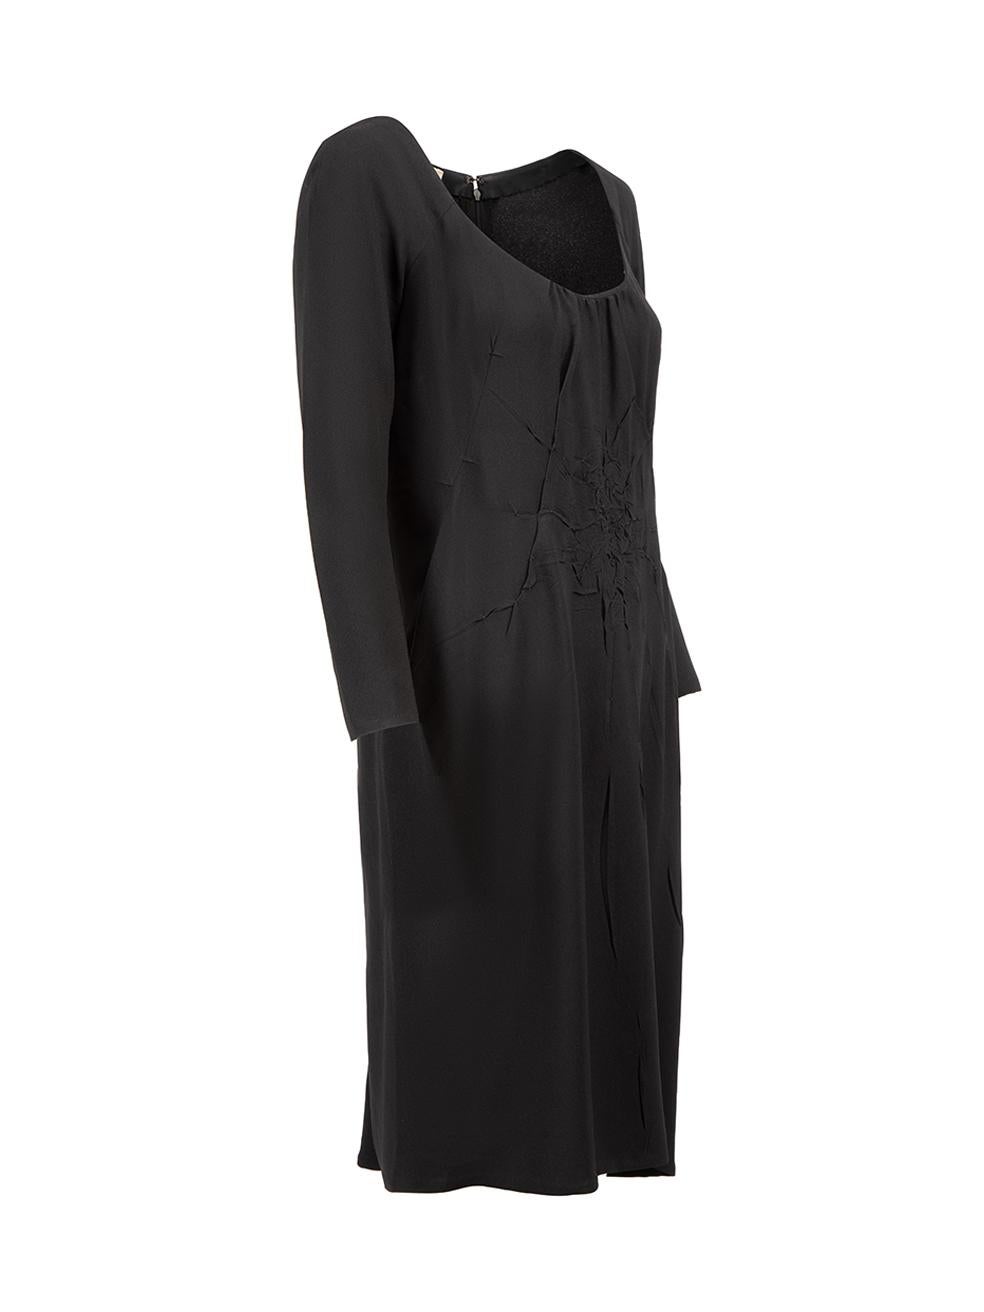 CONDITION is Very good. Minimal wear to dress is evident. Minimal wear to neckline lining with slight discolouration to the silk on this used Prada designer resale item.



Details


Black

Synthetic

Knee length dress

Ruched accent

Scoop